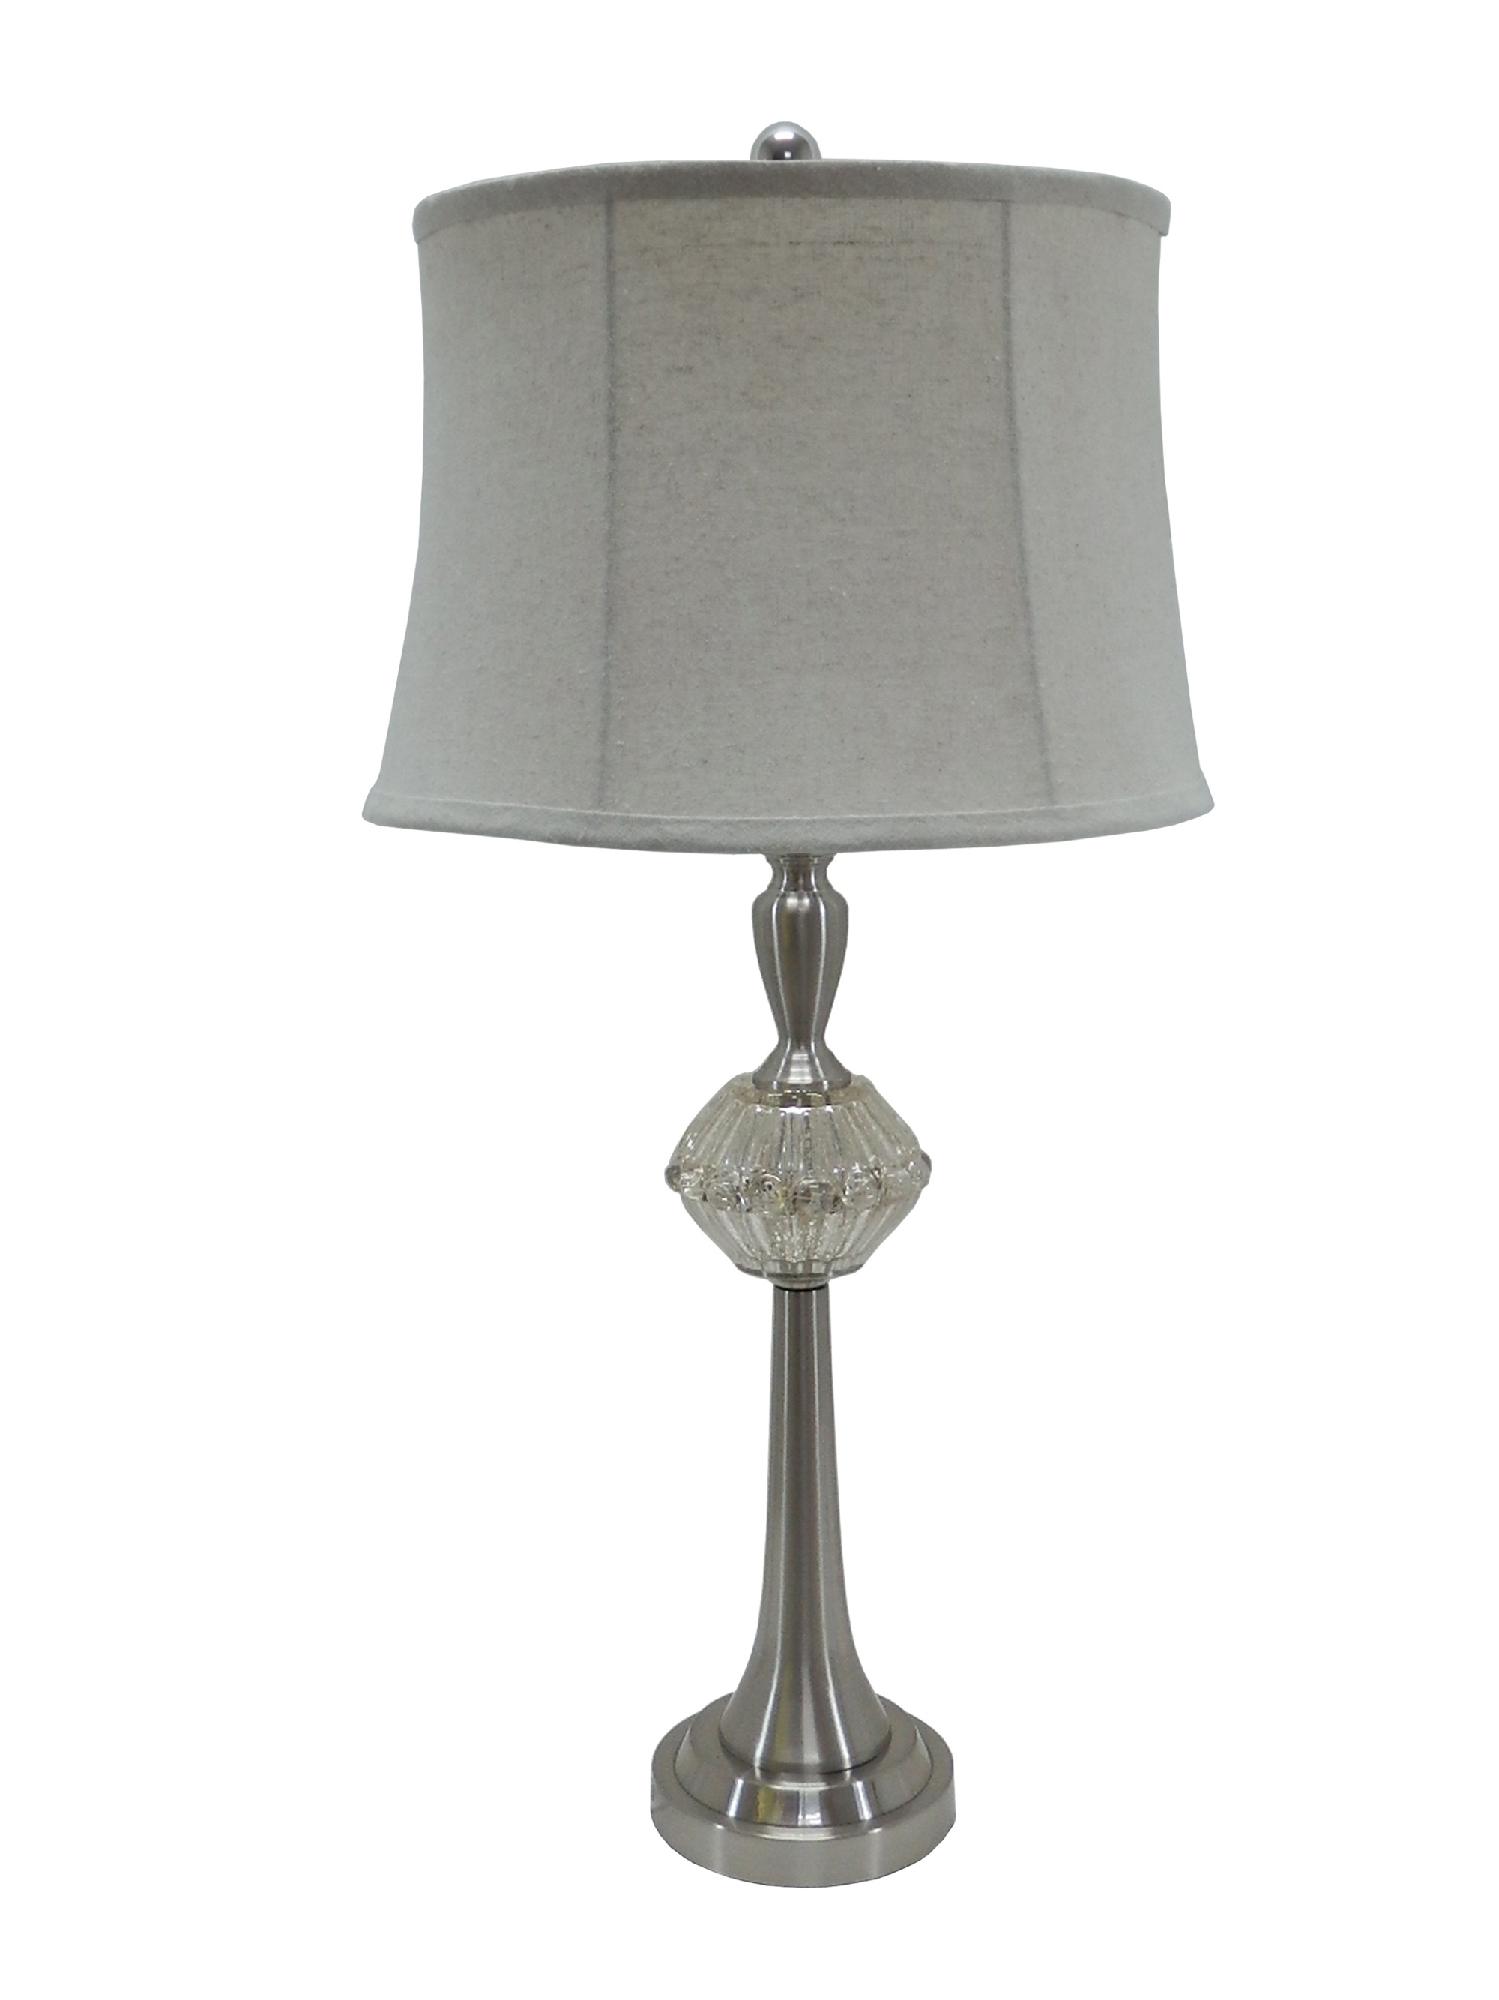 30" Mercury Glass & Metal Table Lamp with Polished Nickel Finish.